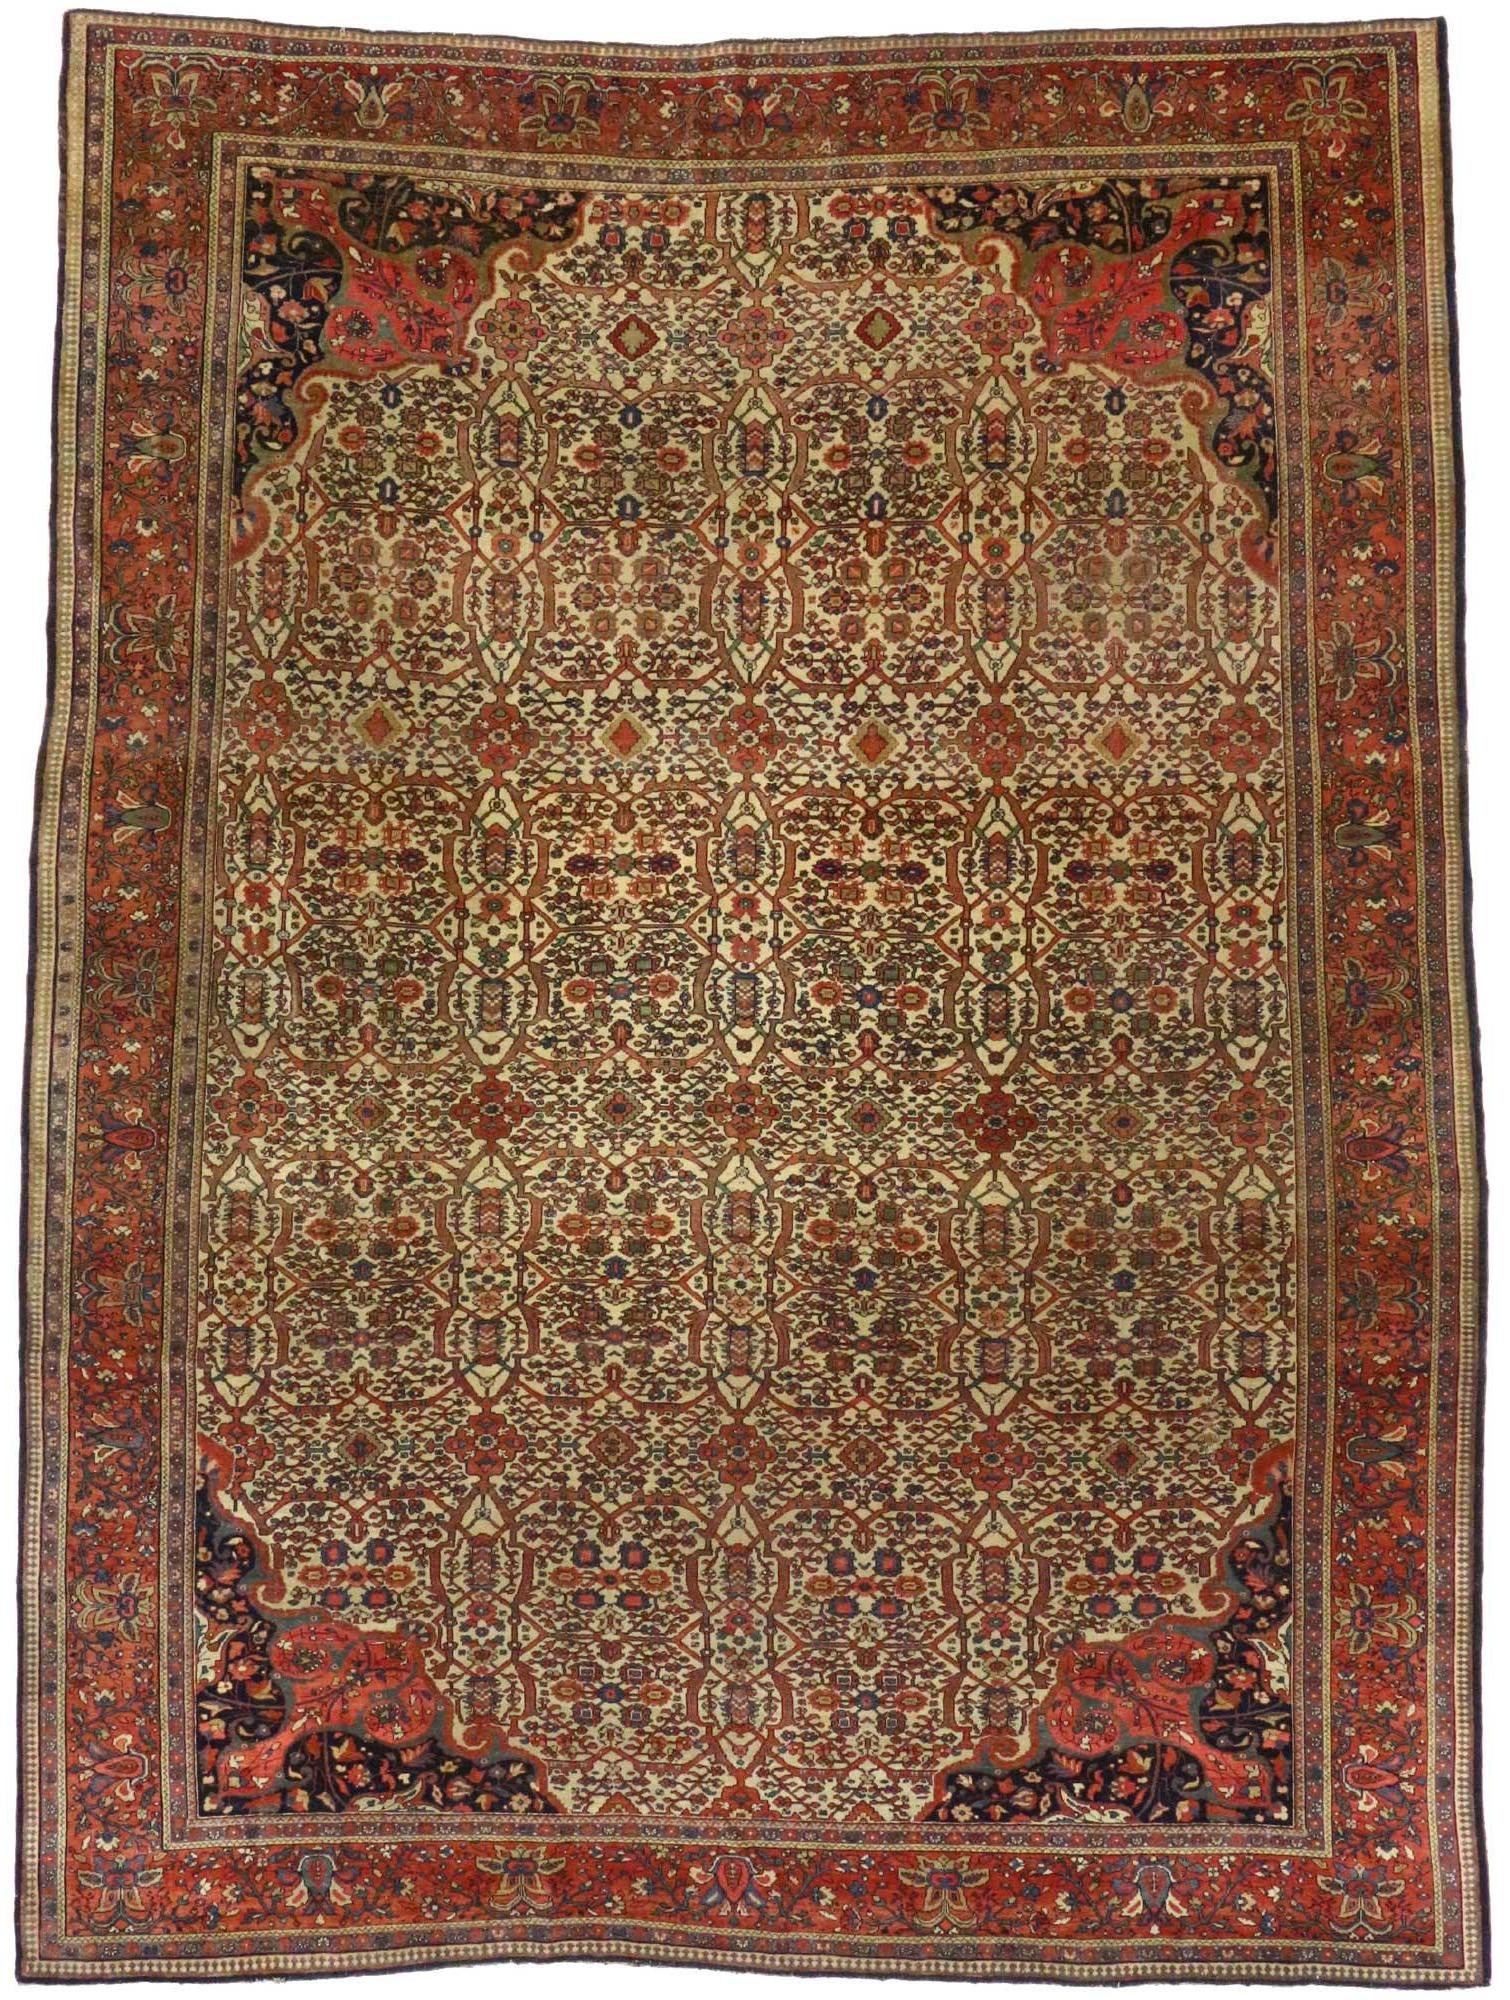 74980 Late 19th Century Antique Persian Farahan Rug with American Colonial Style 08'08 x 11'04. Displaying well-balanced symmetry and a simple design aesthetic, this hand knotted wool antique Persian Farahan rug beautifully embodies American